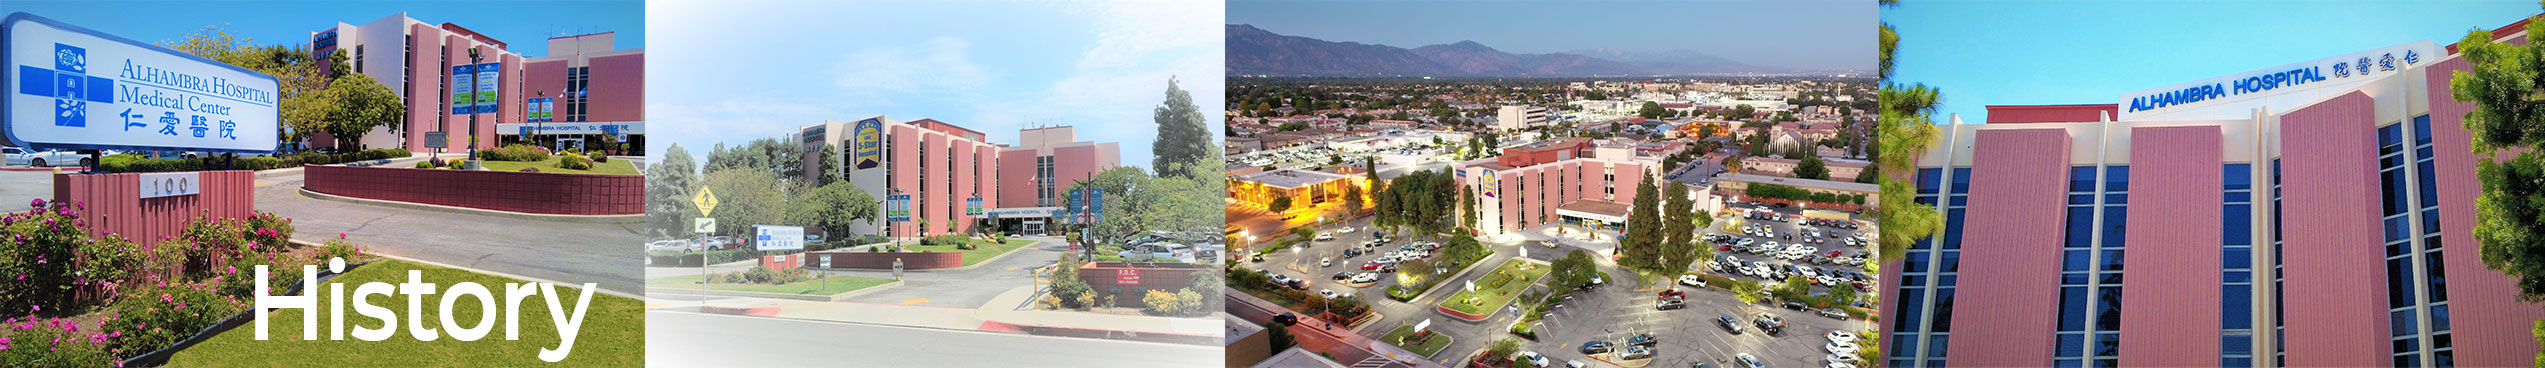 Pictured is different angles of the Alhambra Hospital Medical Center

History